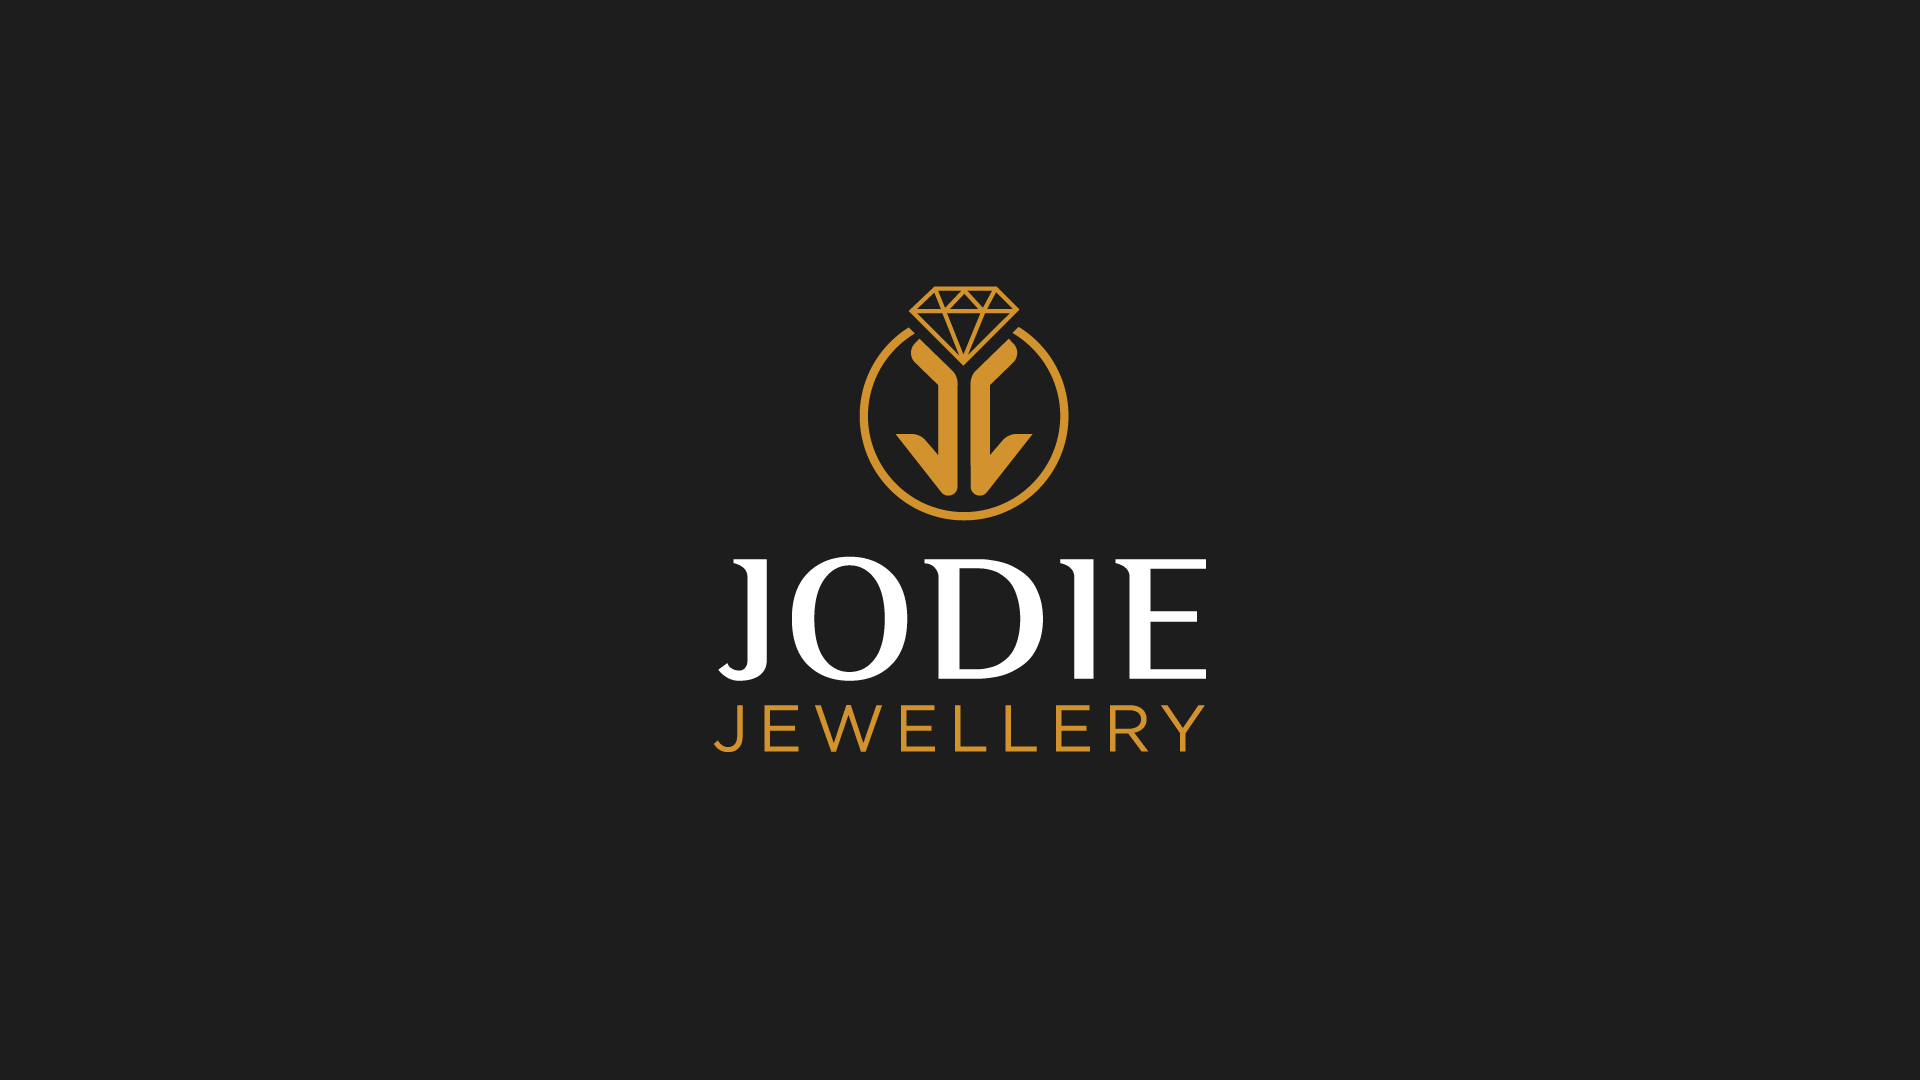 Jodie Jewellery Unveils Their Brand for The First Time at The Yard!